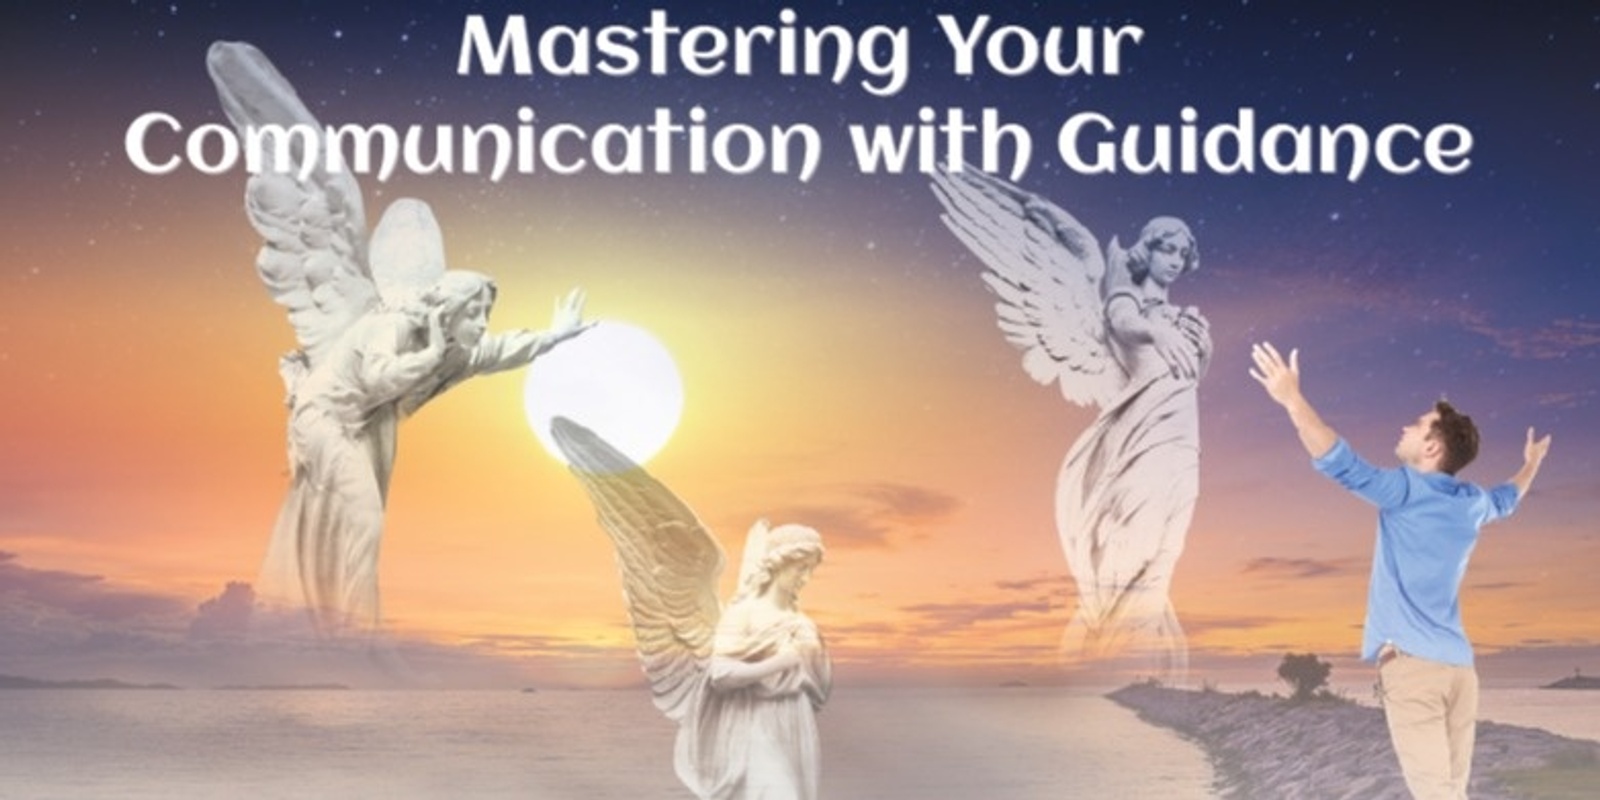 Banner image for Mastering your Communication with Guidance (#201@AWK) - Online!